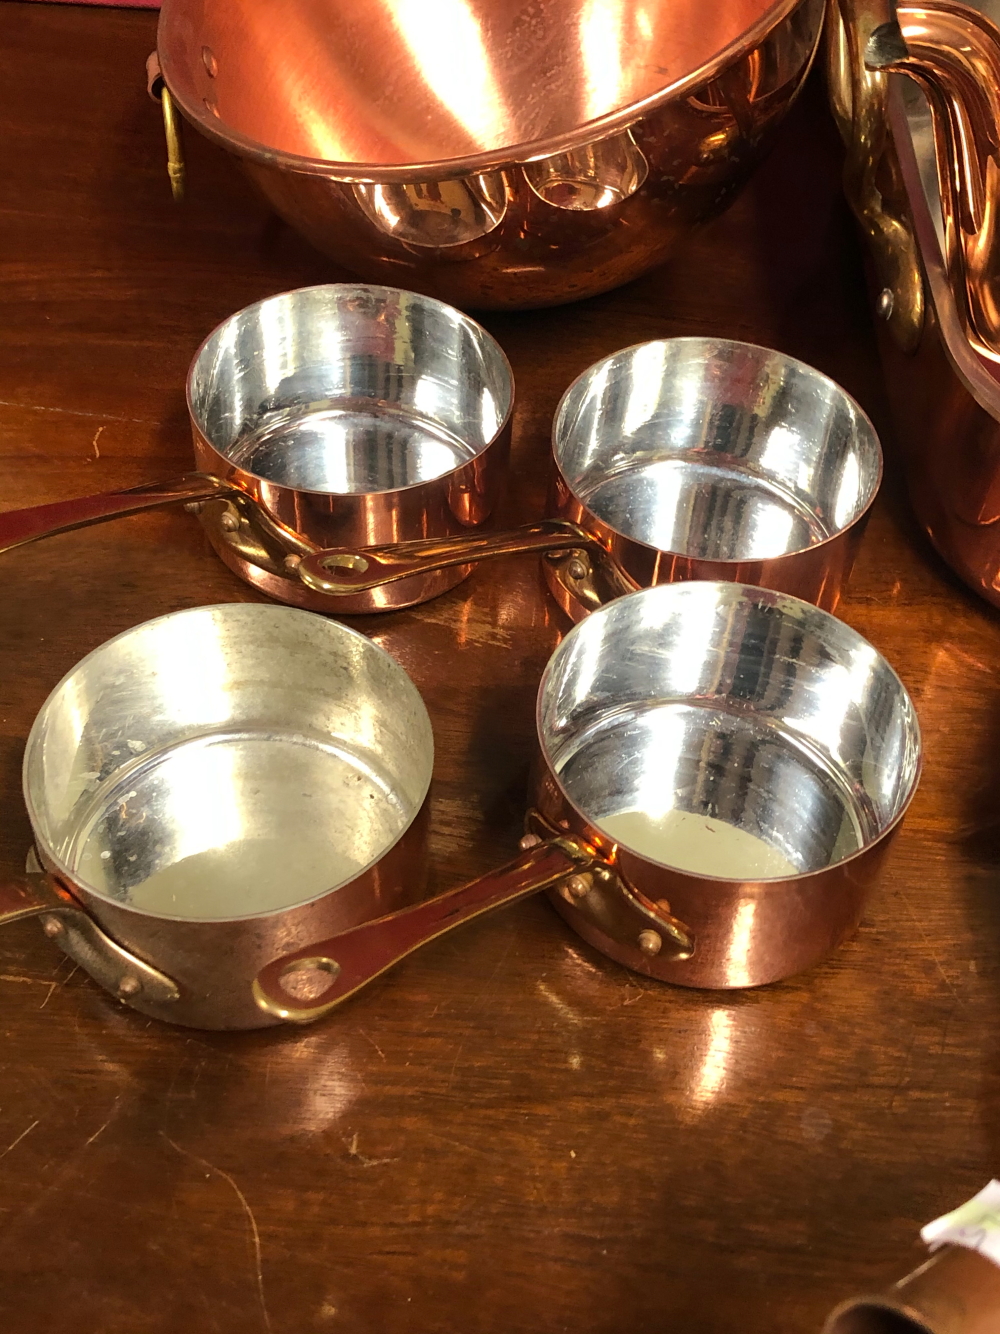 A COLLECTION OF 10 COPPER SAUCEPANS. Dia. 9.5cms. TWO LARGER COPPER SAUCEPANS, A TWO HANDLED - Image 9 of 9